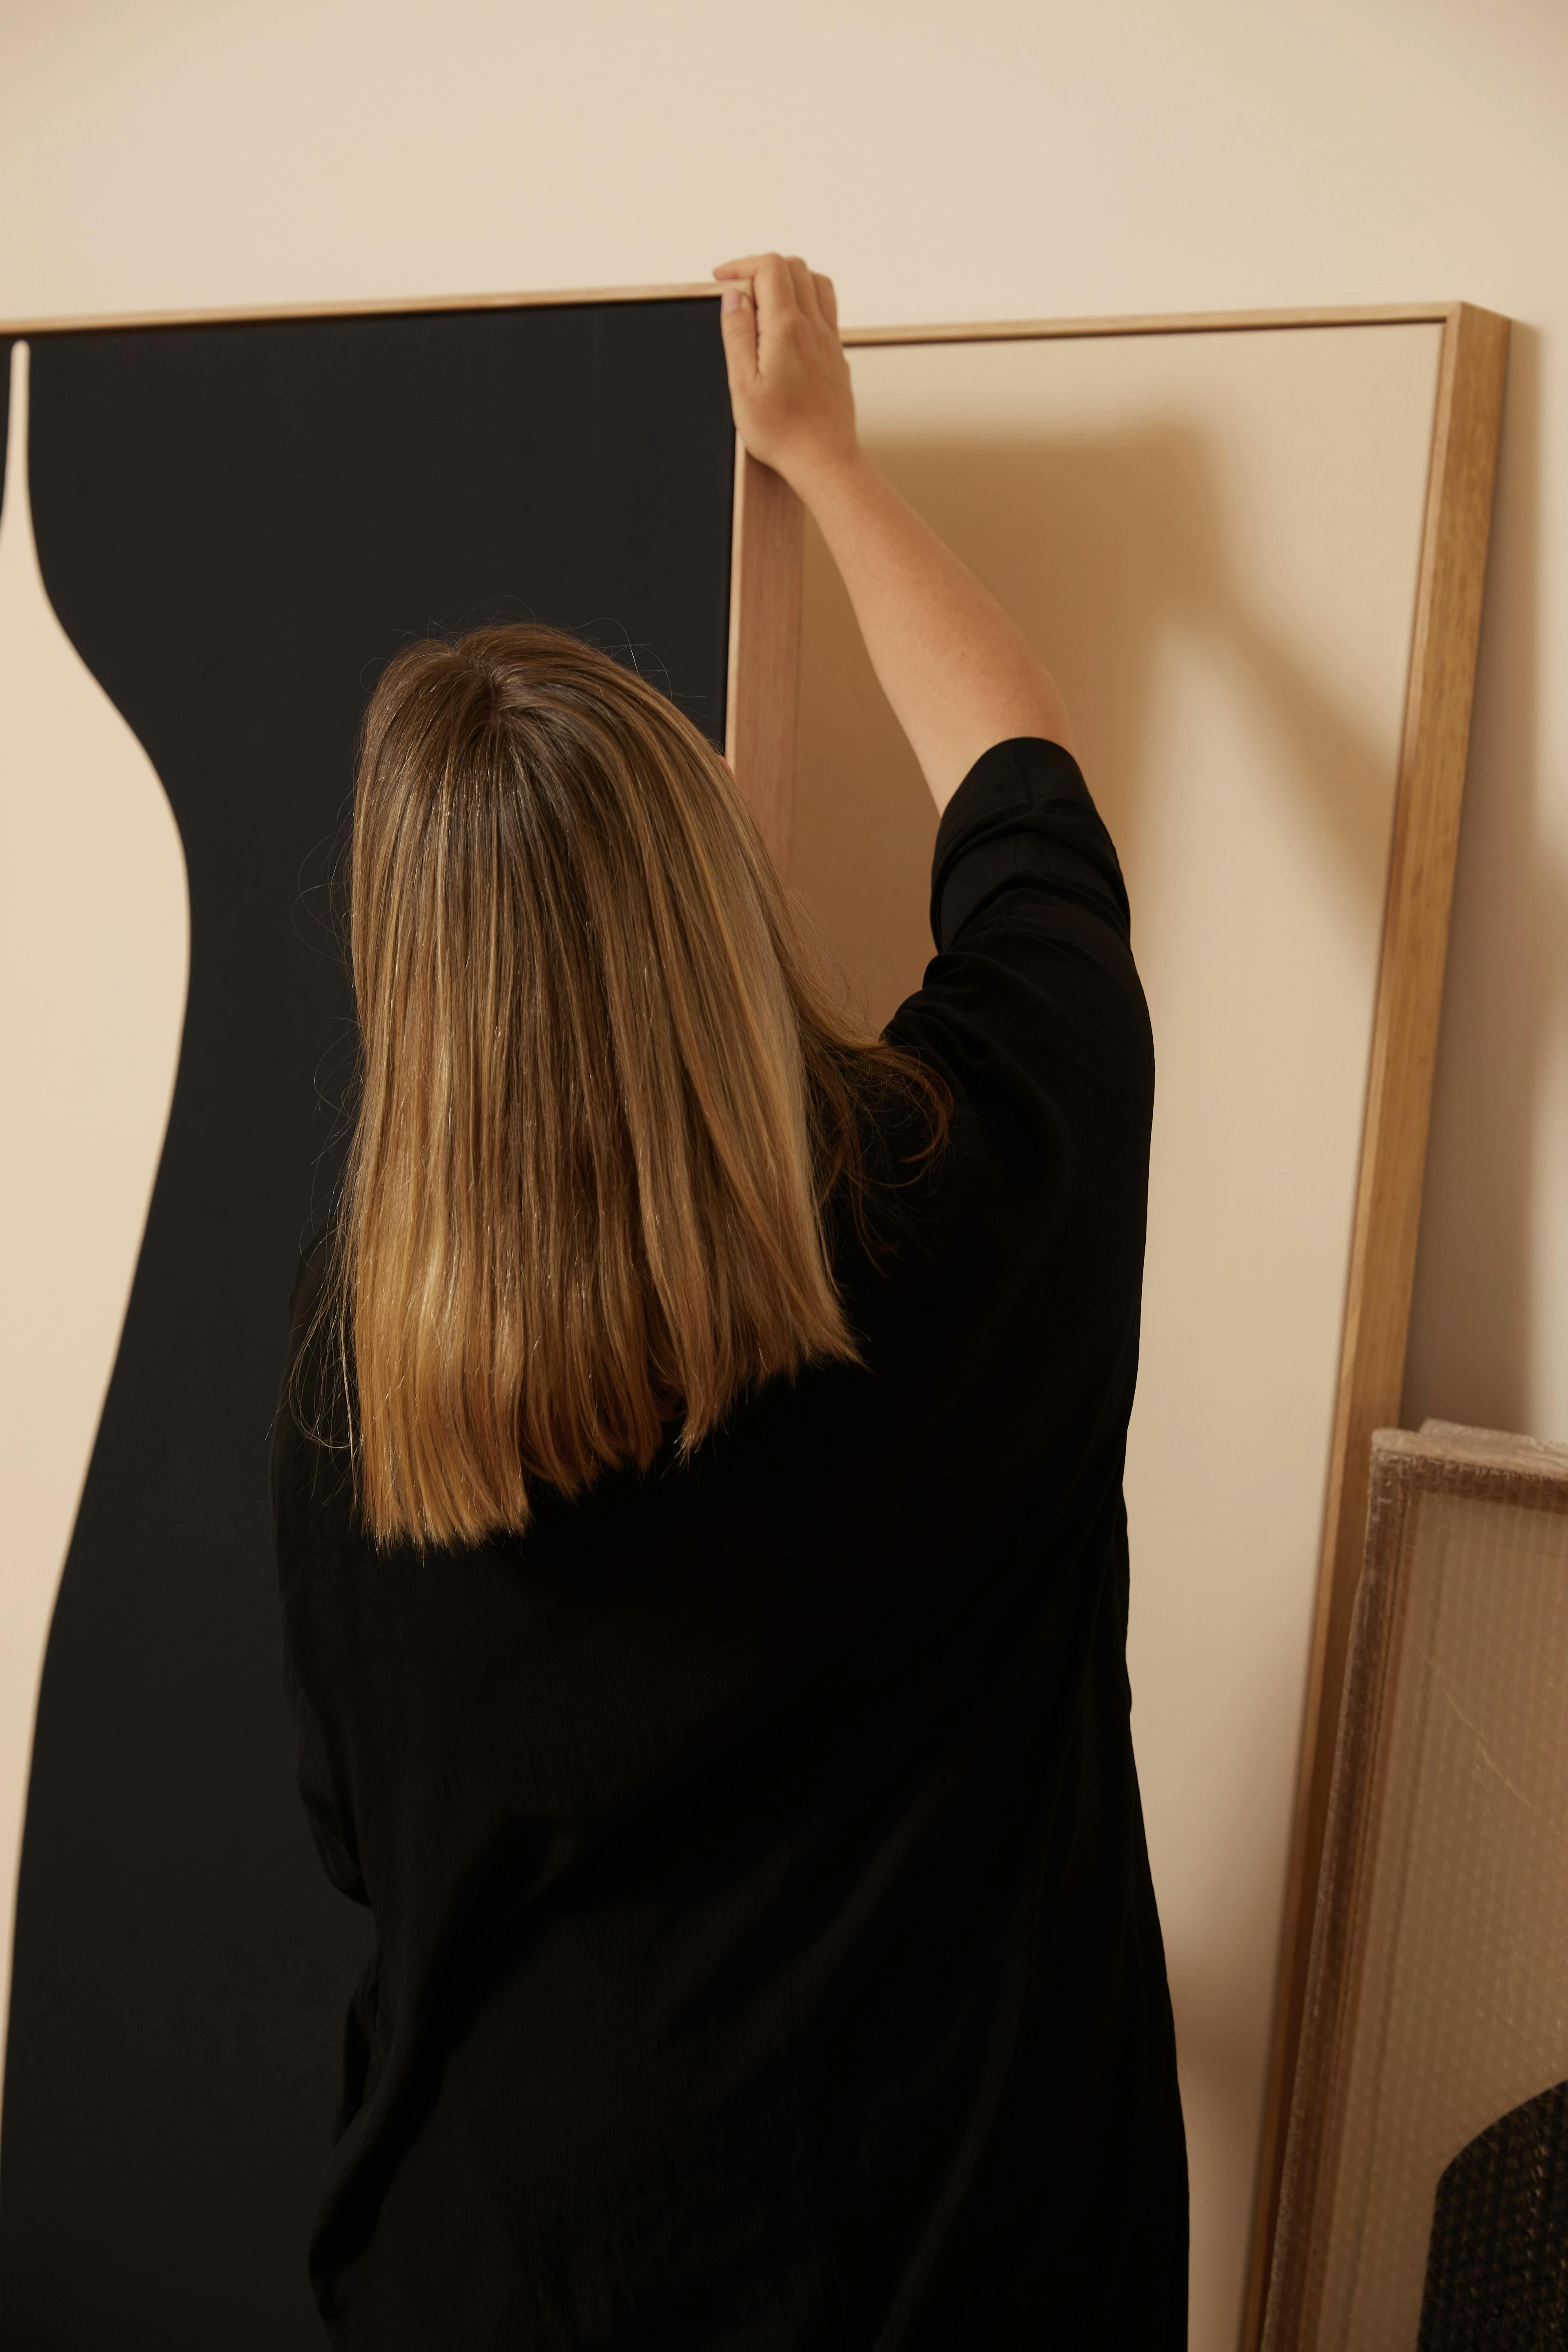 The back of Caroline Walls as she flips through black and white paintings in her studio.